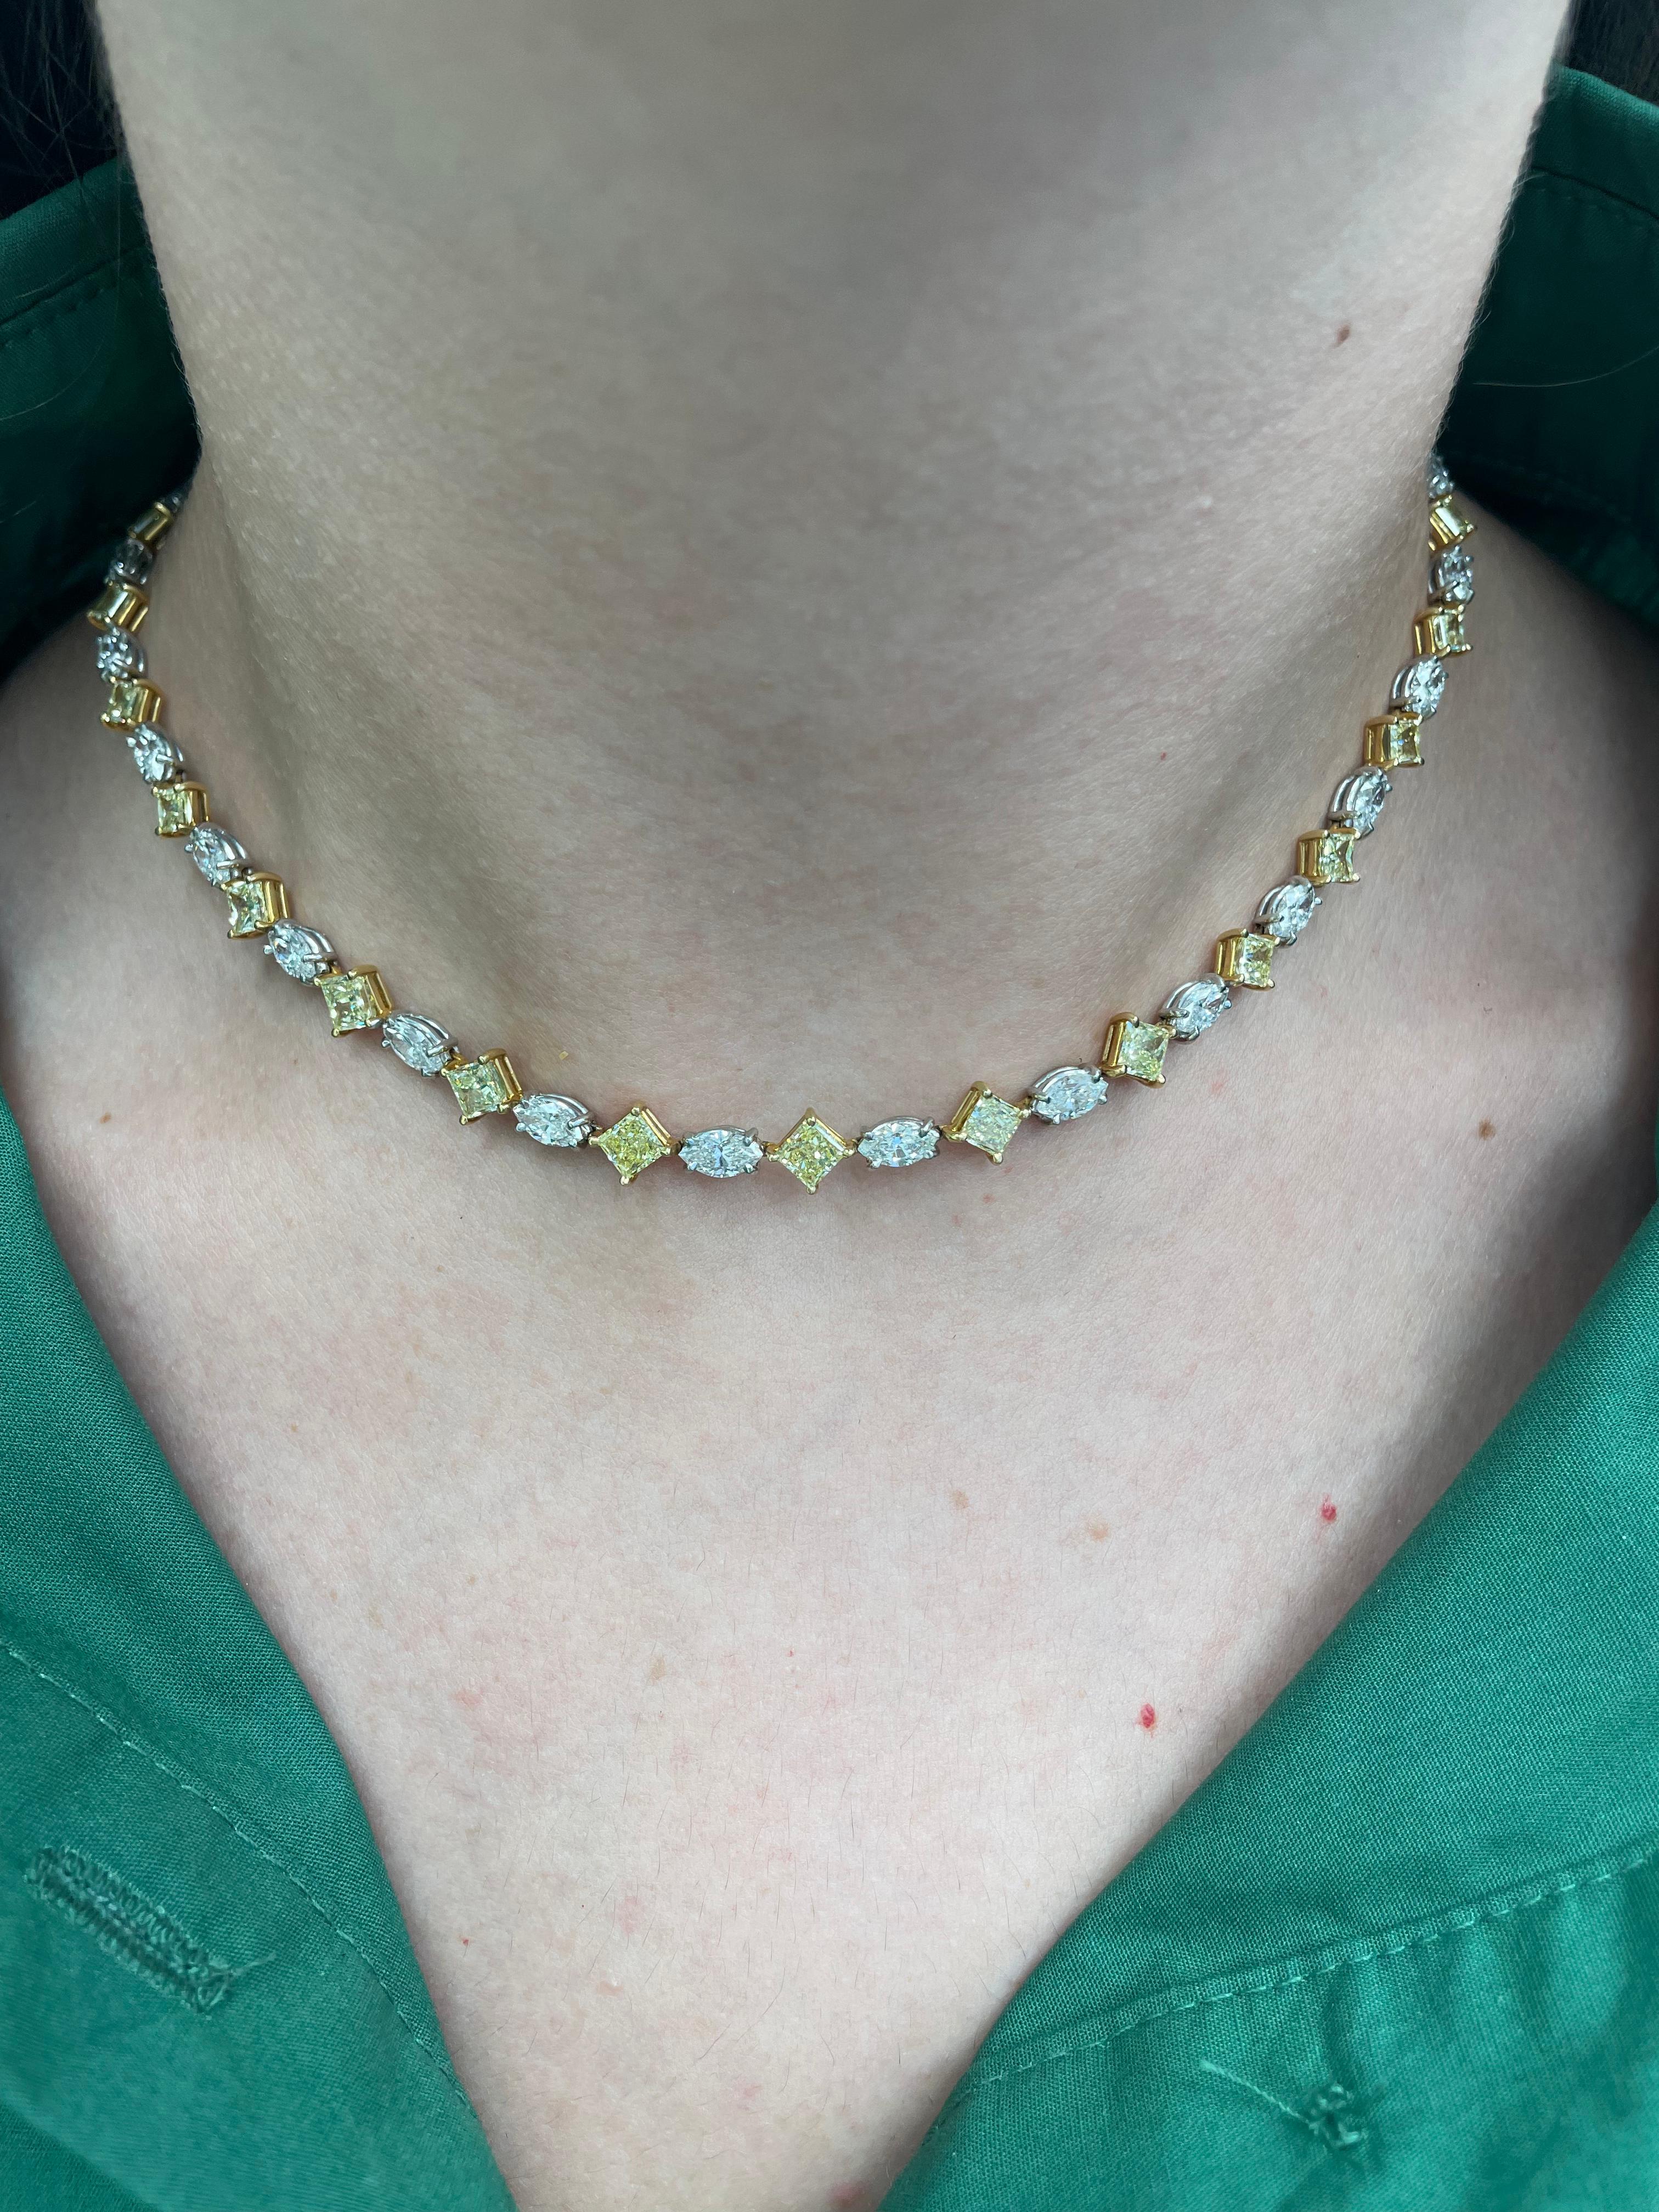 Beautiful yet unique alternating diamond tennis necklace. High jewelry by Alexander Beverly Hills.
20.52 carats total diamond weight.
11.40 carats of princess cut diamonds, approximately Fancy Intense Yellow to Fancy Yellow color and VS2/SI1